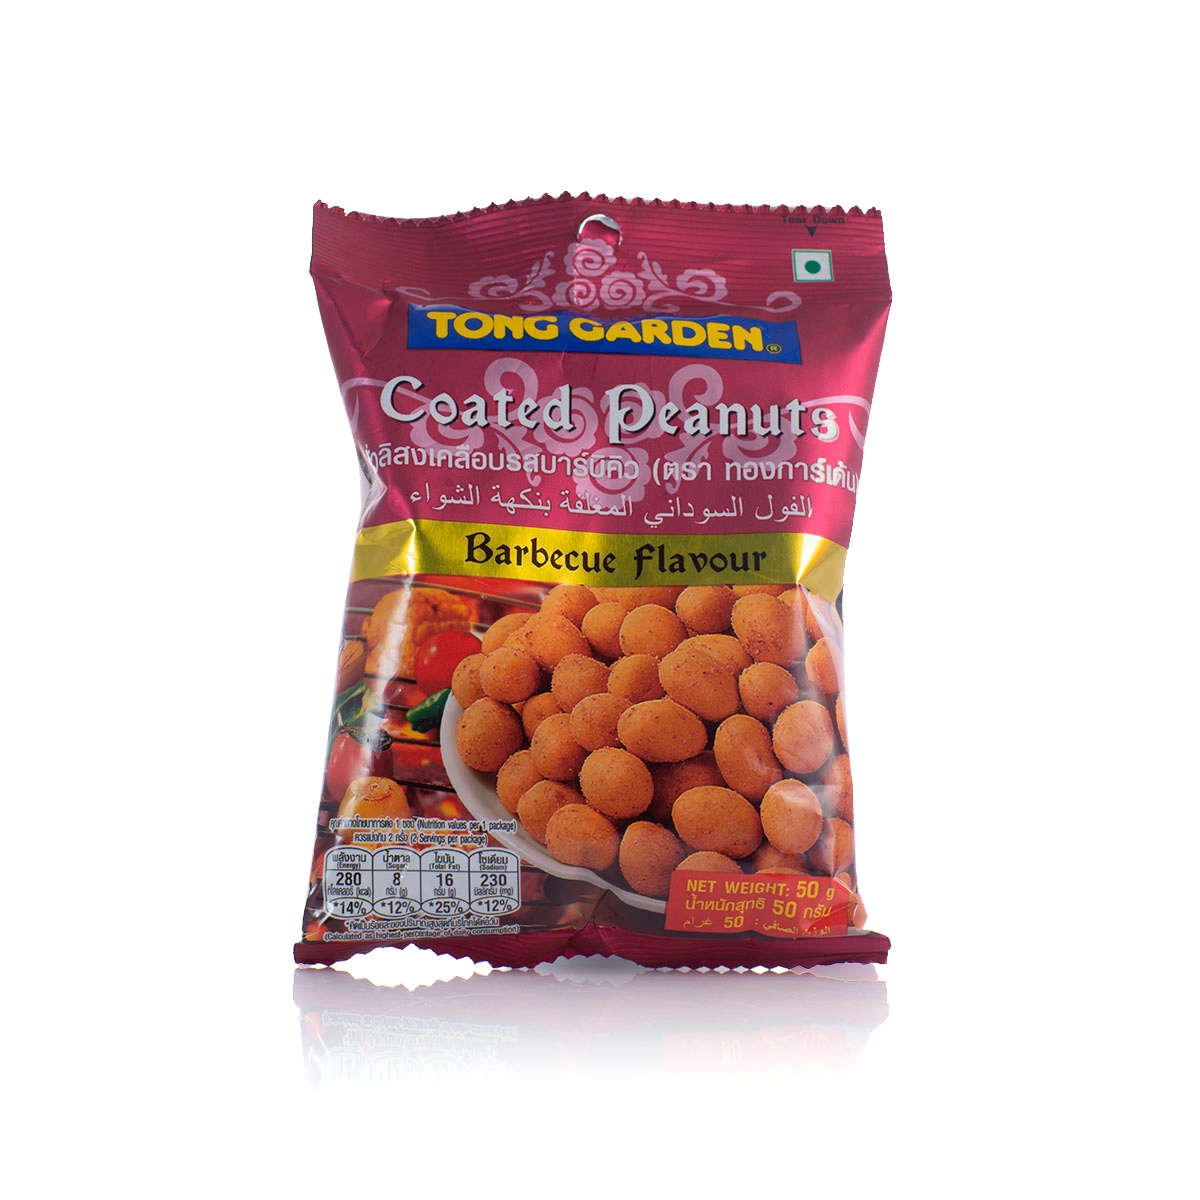 Tong Garden Coated Peanuts Barbecue Flavour 50G - TONG GARDEN - Snacks - in Sri Lanka